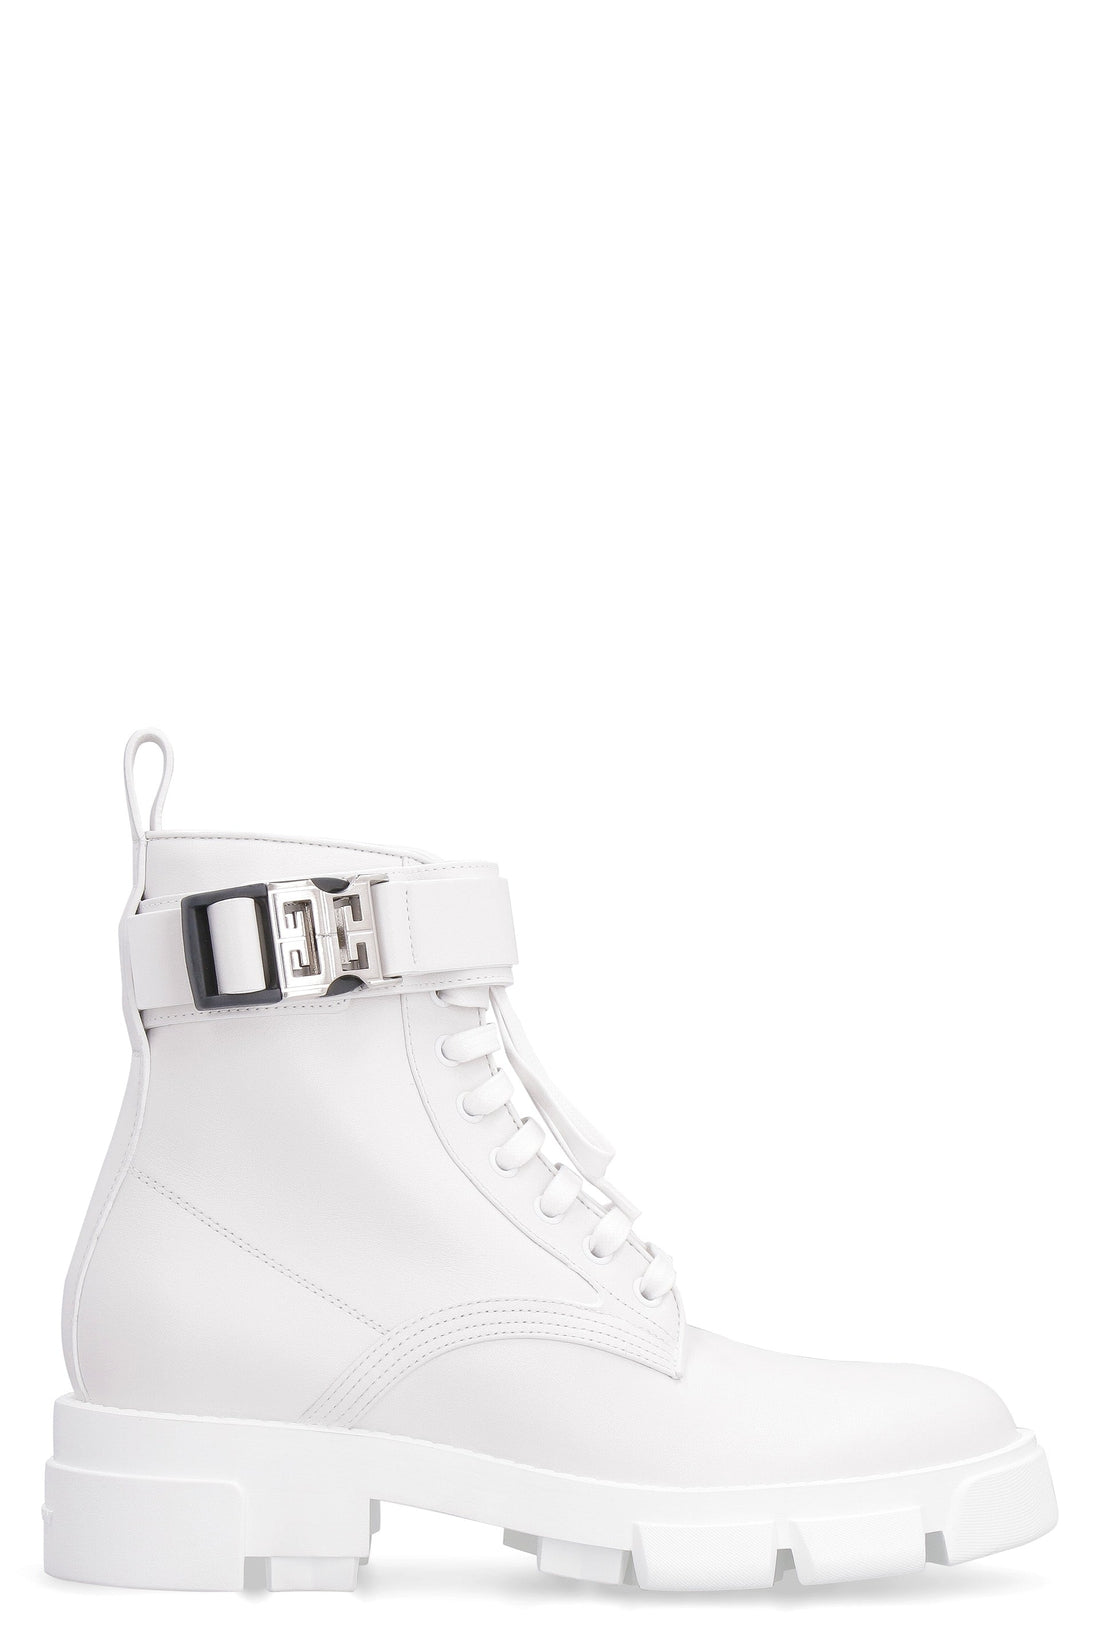 Givenchy-OUTLET-SALE-Terra leather ankle boots-ARCHIVIST